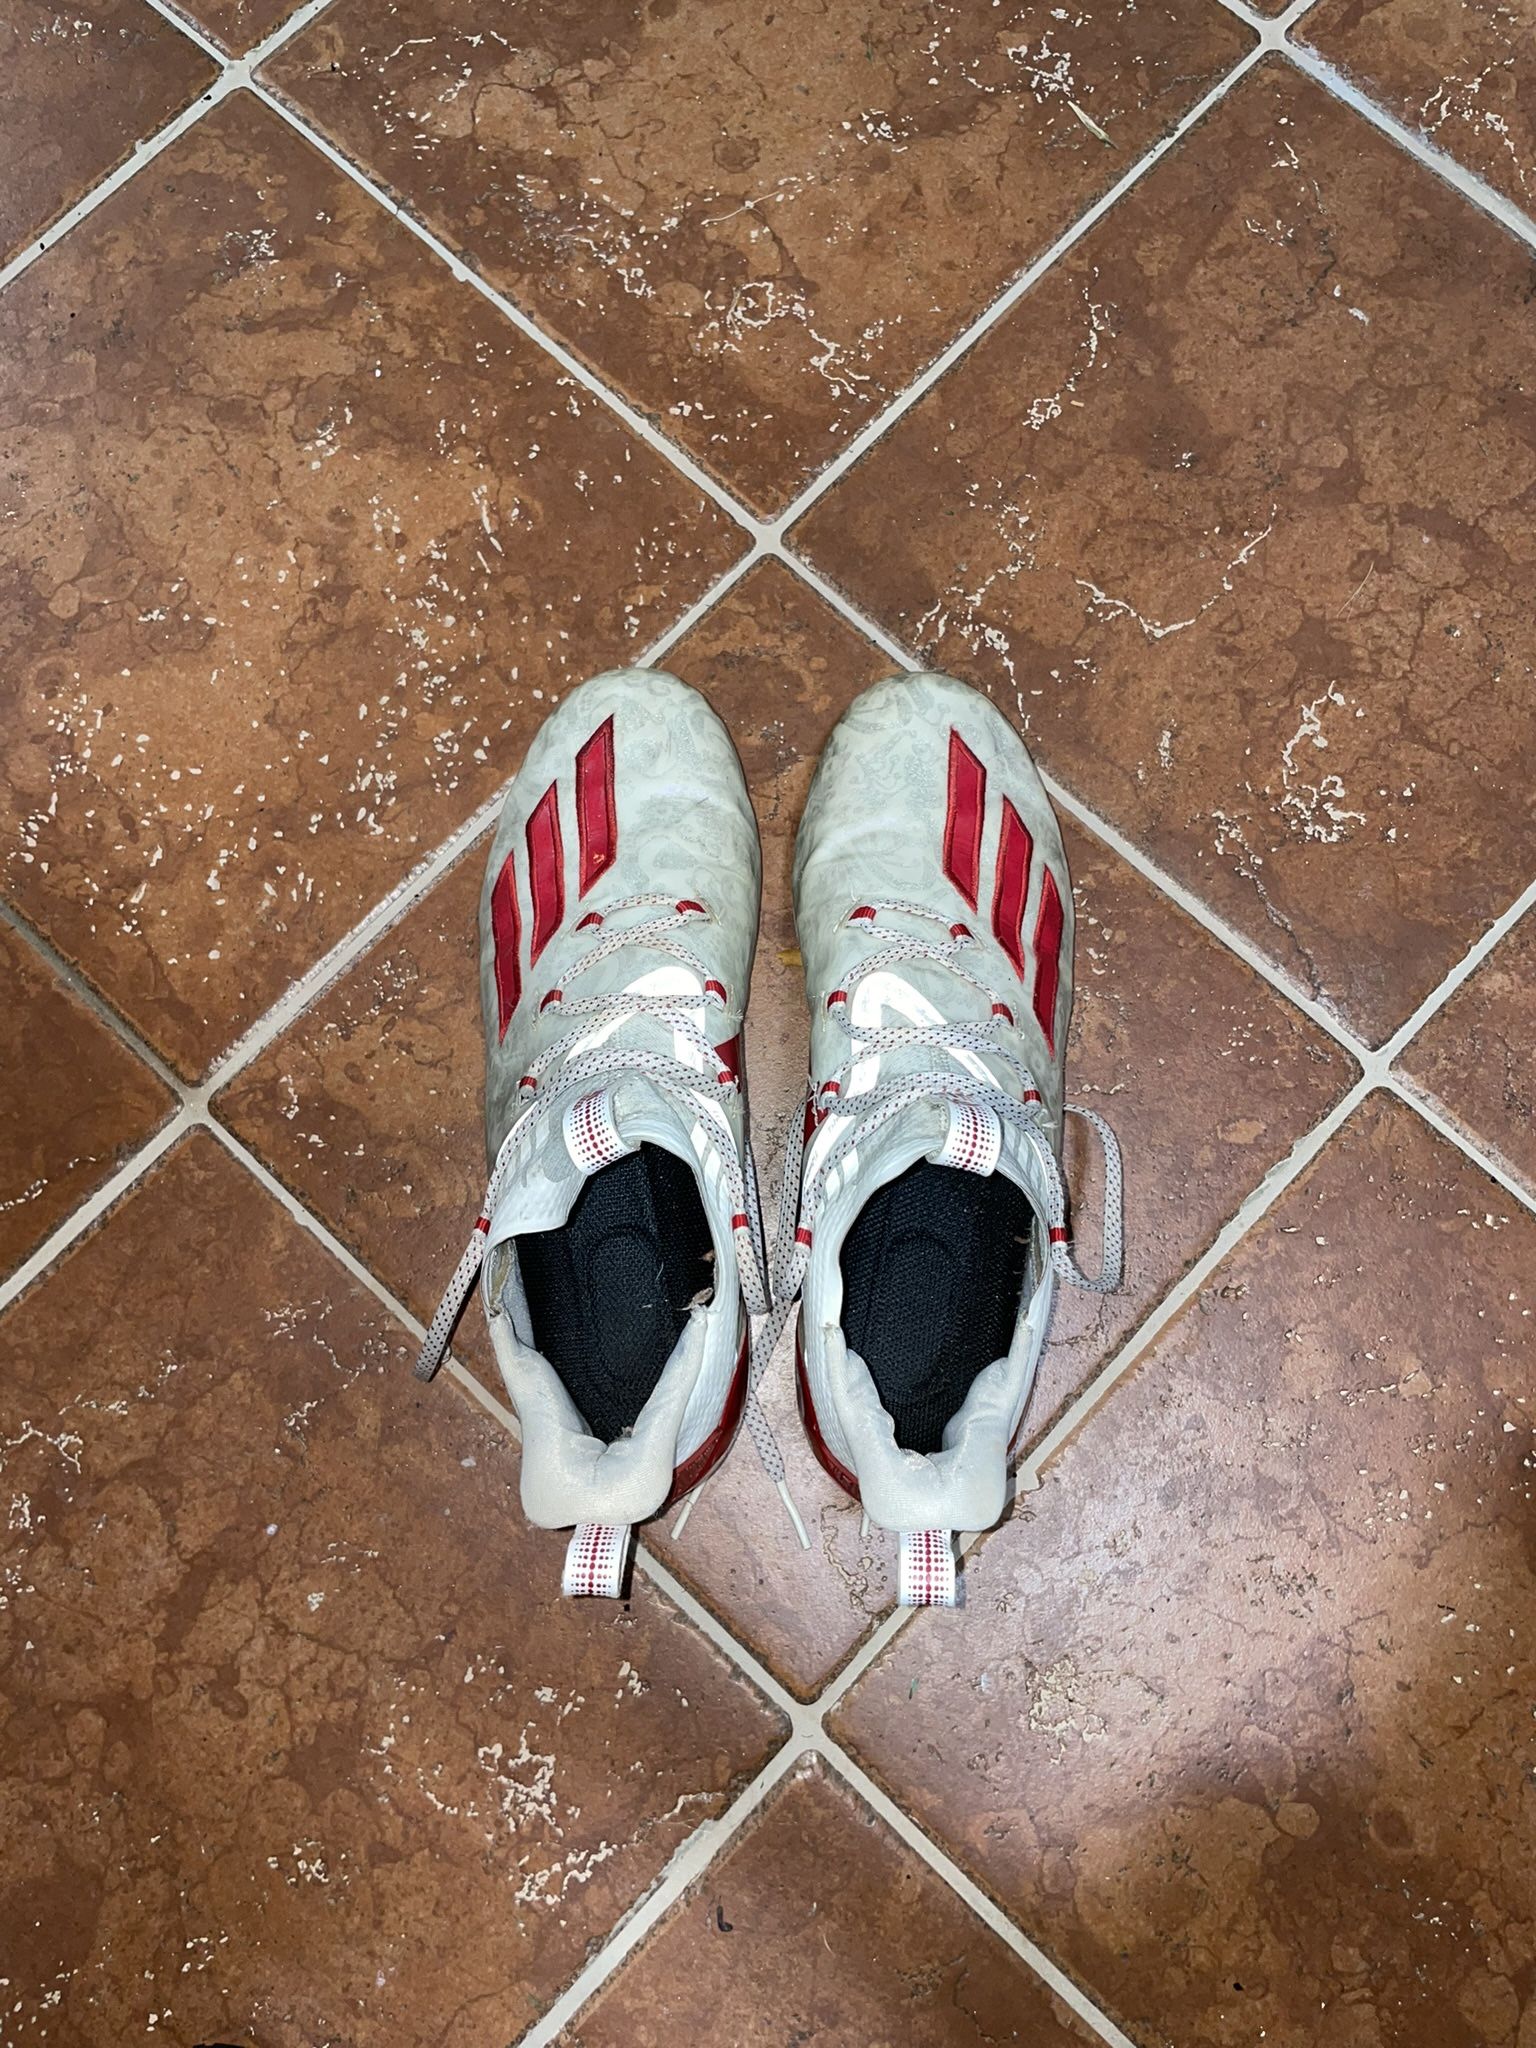 Adidas Adizero Young King Reign Floral White/Red Size 10 Football Cleats